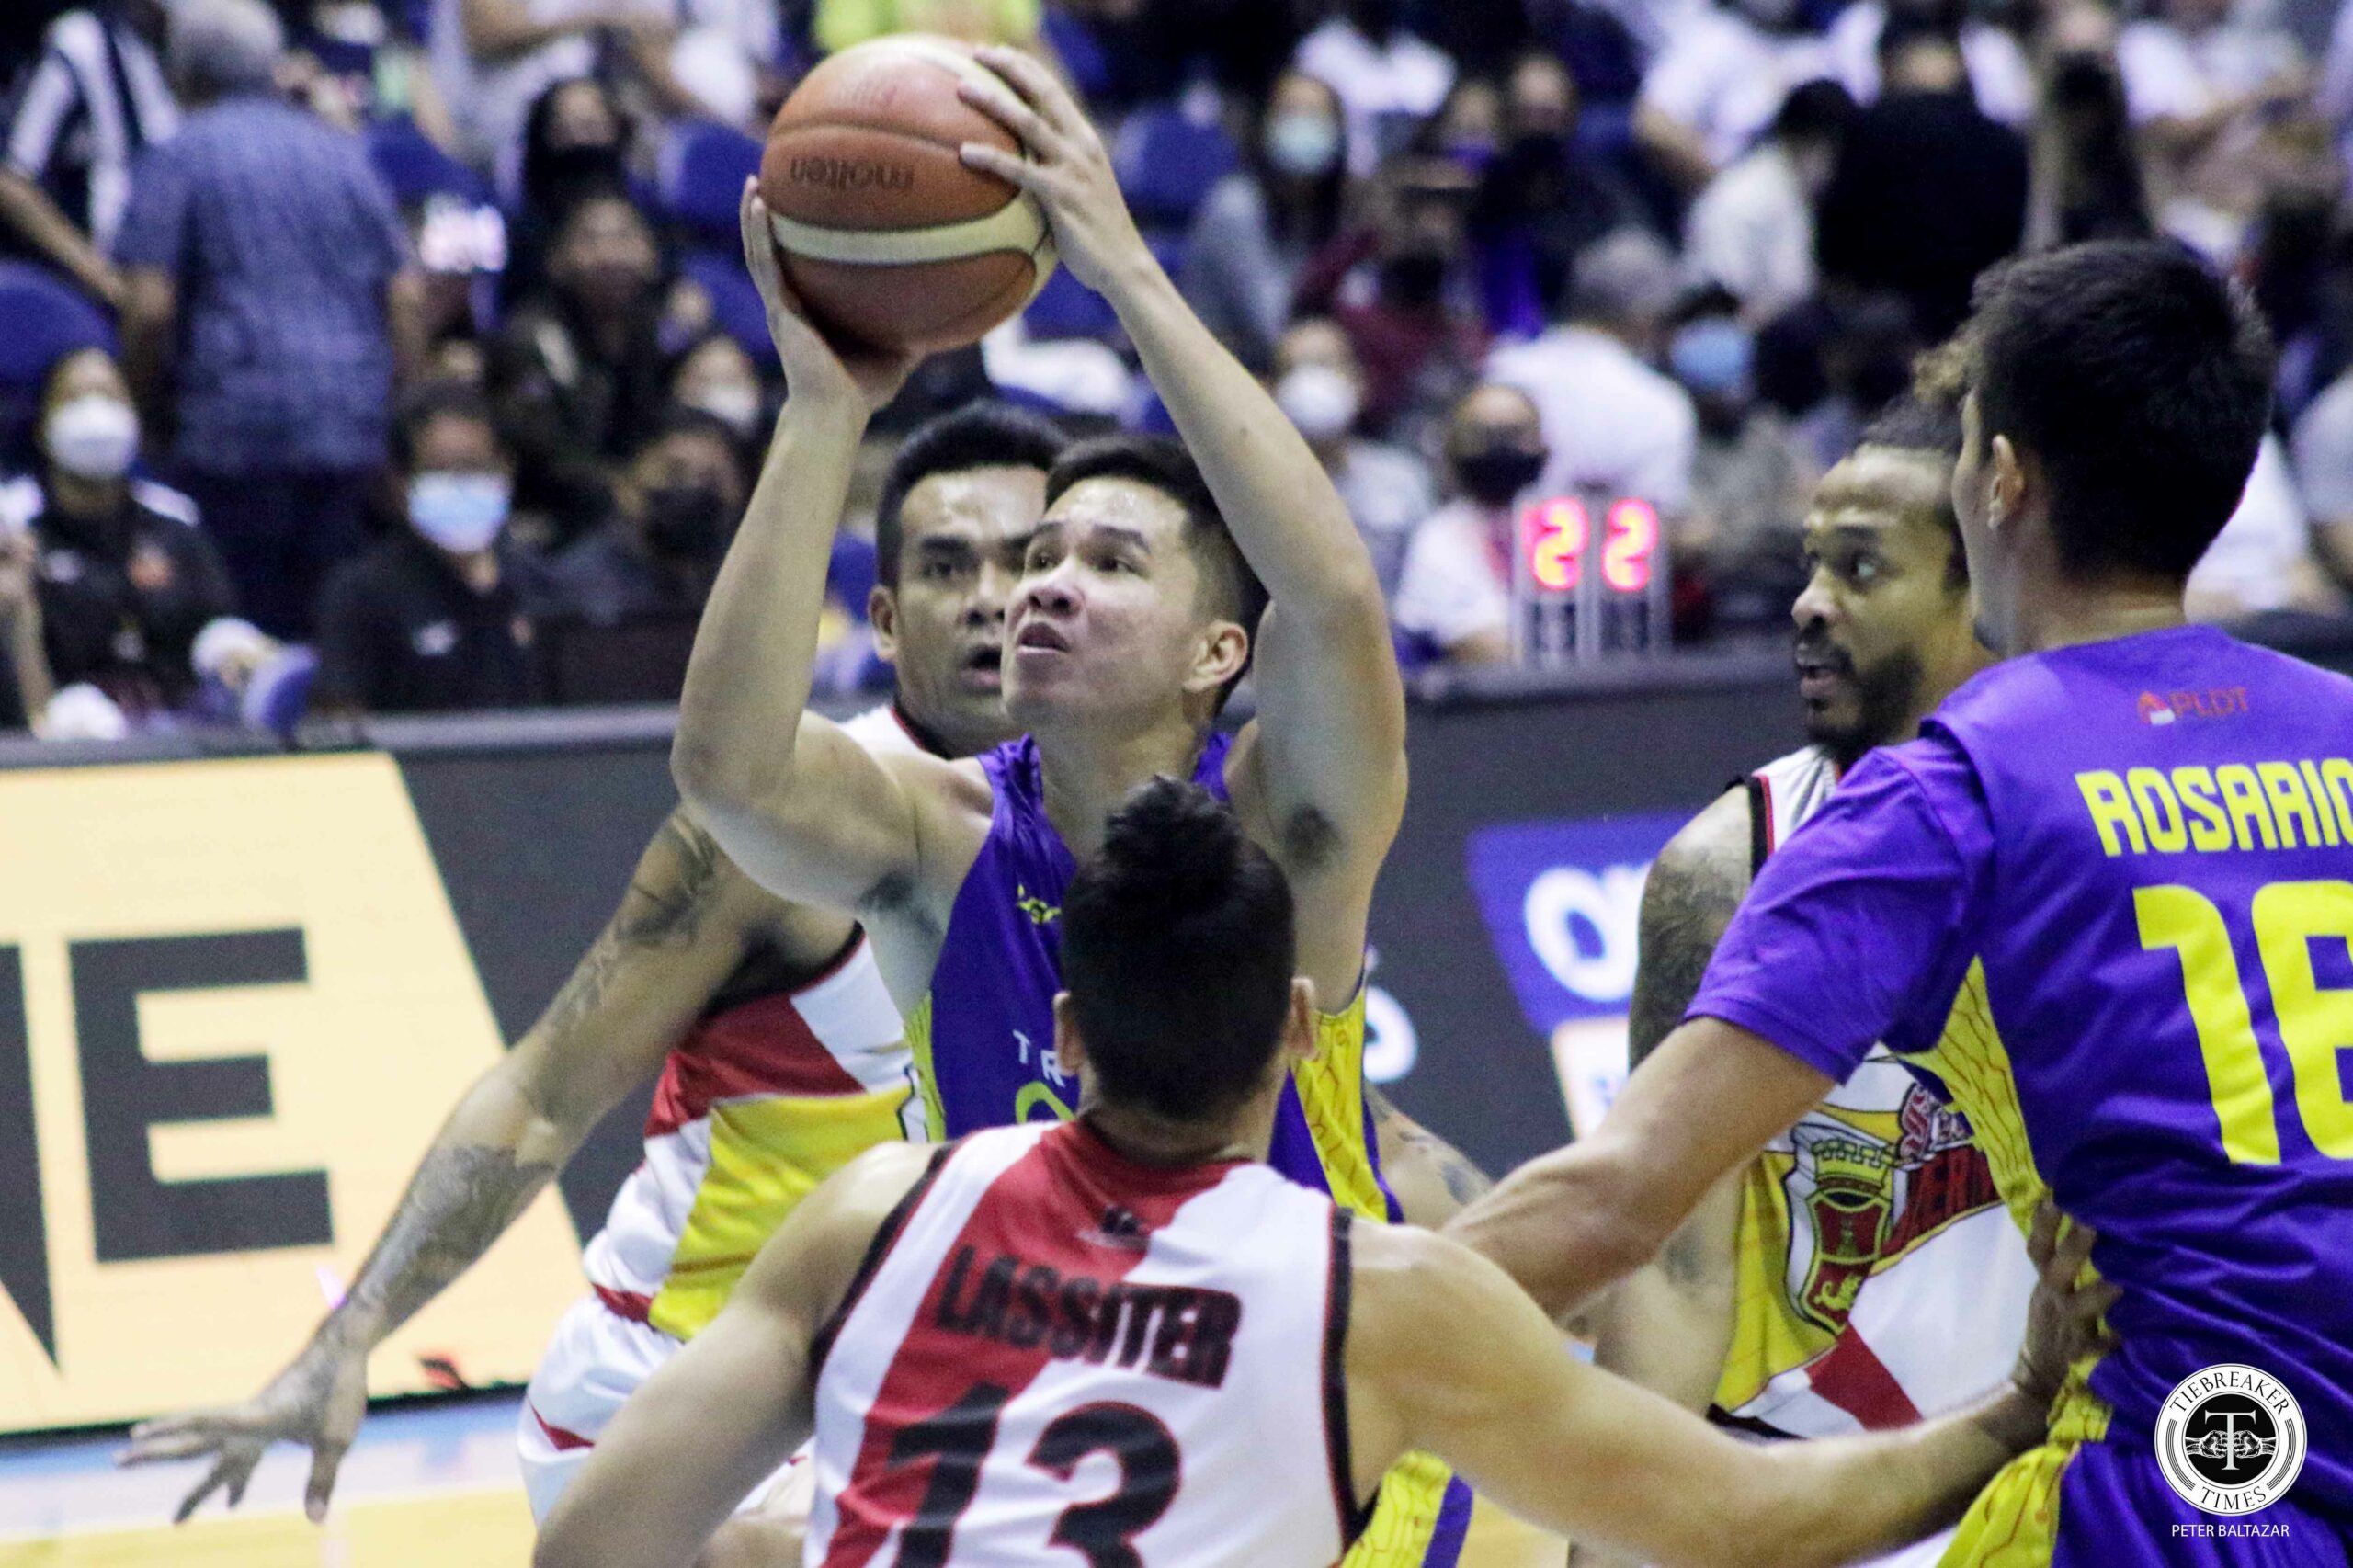 2022-PBA-Philippine-Cup-Finals-TNT-vs-San-Miguel-Roger-Pogoy-scaled Pogoy confident Mikey Williams will bounce back in Game 7 Basketball News PBA  - philippine sports news